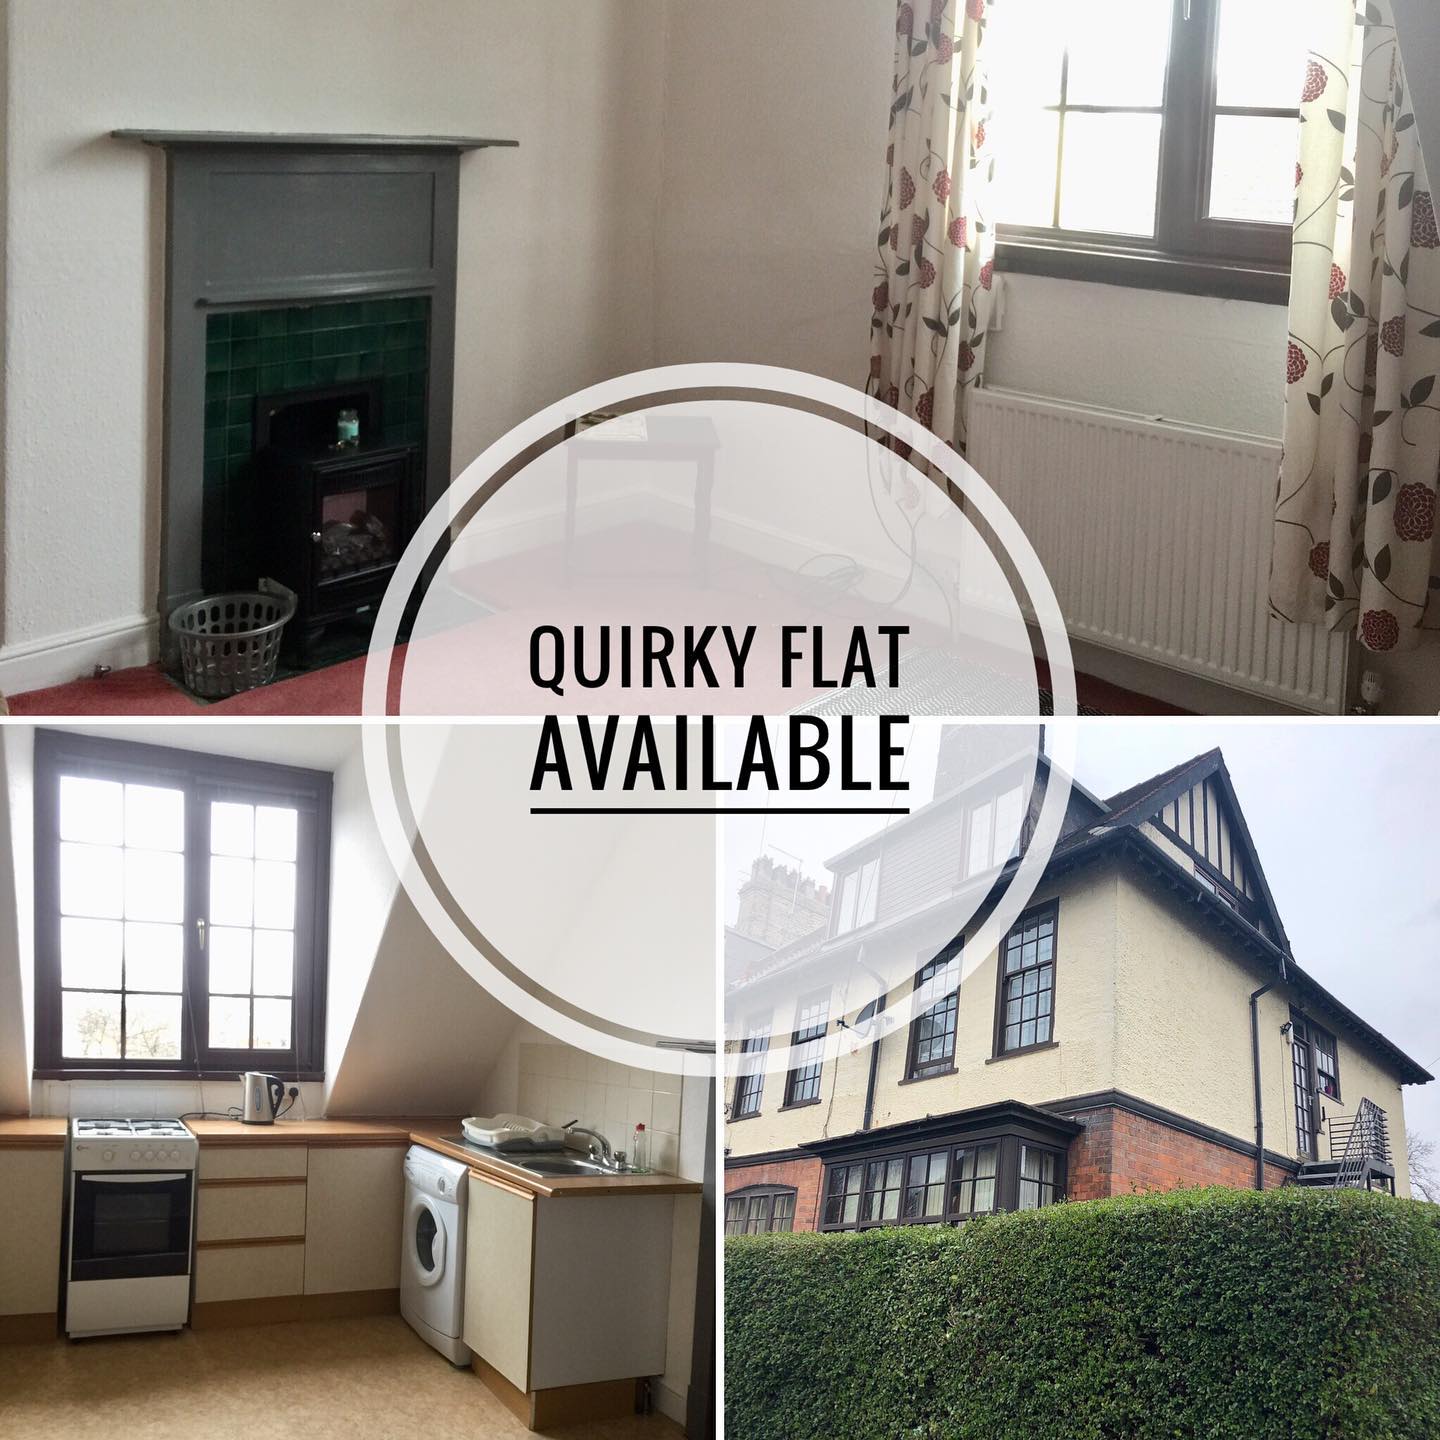 Get in touch to view! This unique one bedroom flat is on Alexandra Road off Newland Avenue. £395 pcm. Comes furnished! #flattorent #hull #hu5 #homestorent